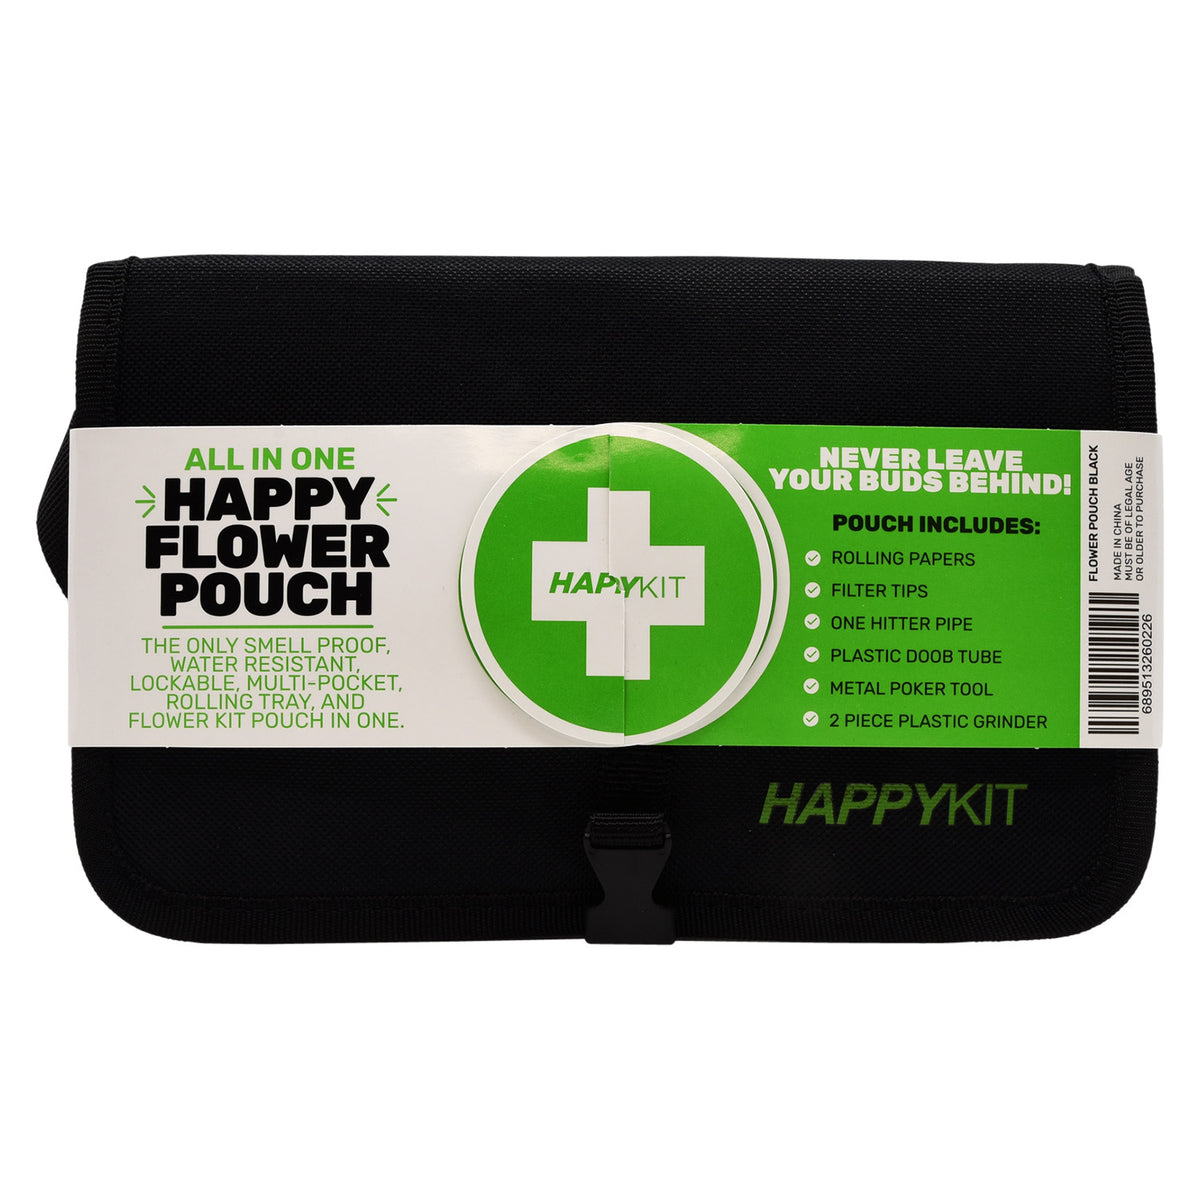 Happy Pouch Dry Herb Smell Proof Travel Pouch